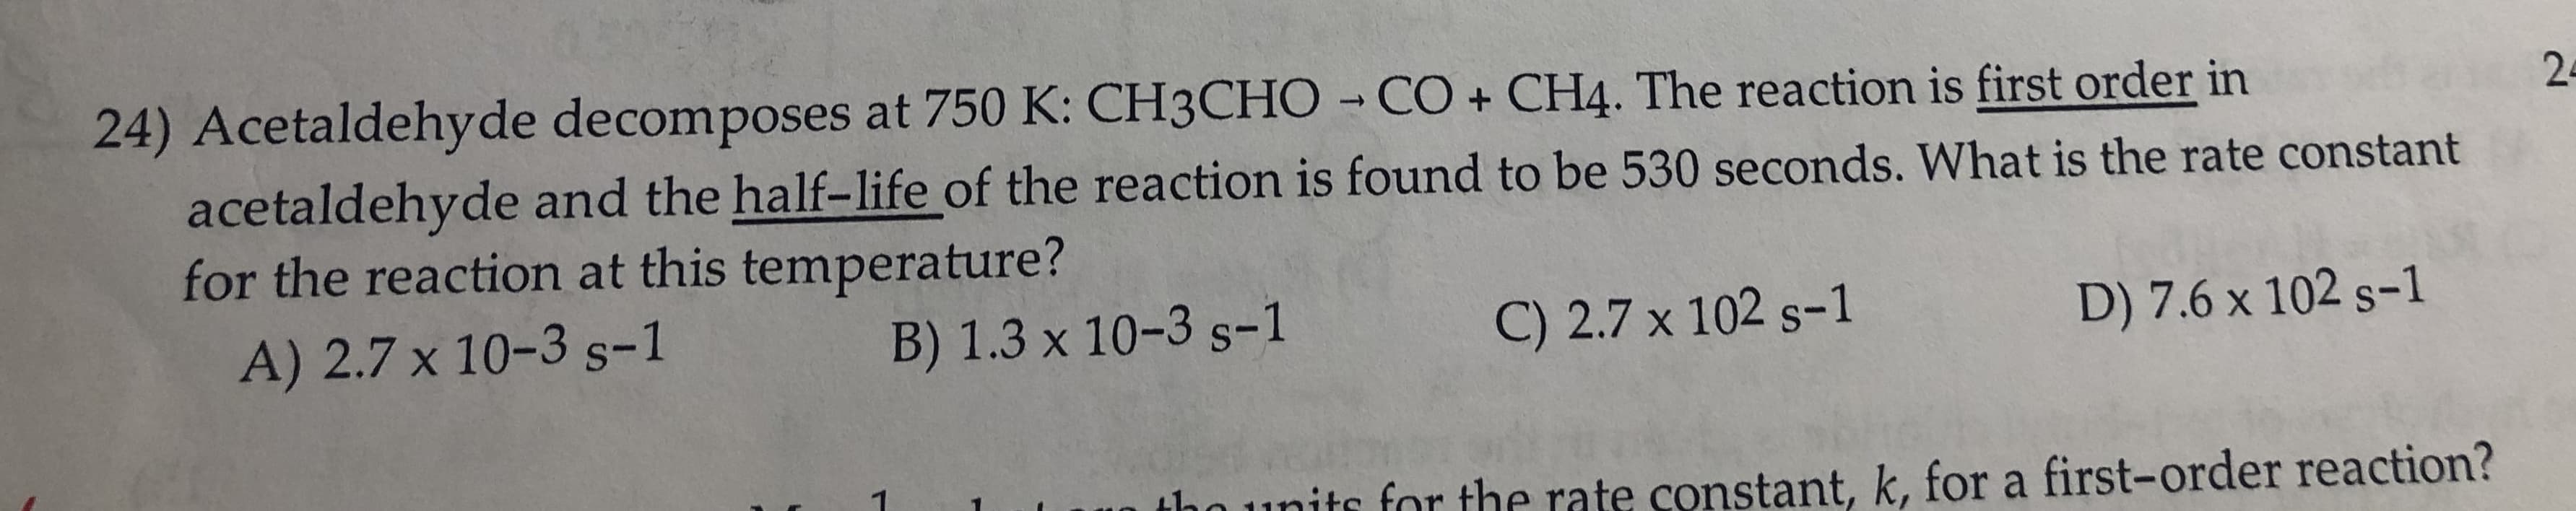 24) Acetaldehyde decomposes at 750 K: CH3CHO - CO + CH4. The reaction is first order in
acetaldehyde and the half-life of the reaction is found to be 530 seconds. What is the rate constant
for the reaction at this temperature?
24
A) 2.7 x 10-3 s-1
B) 1.3 x 10-3 s-1
C) 2.7 x 102 s-1
D) 7.6 x 102 s-1
hounits for the rate constant, k, for a first-order reaction?
